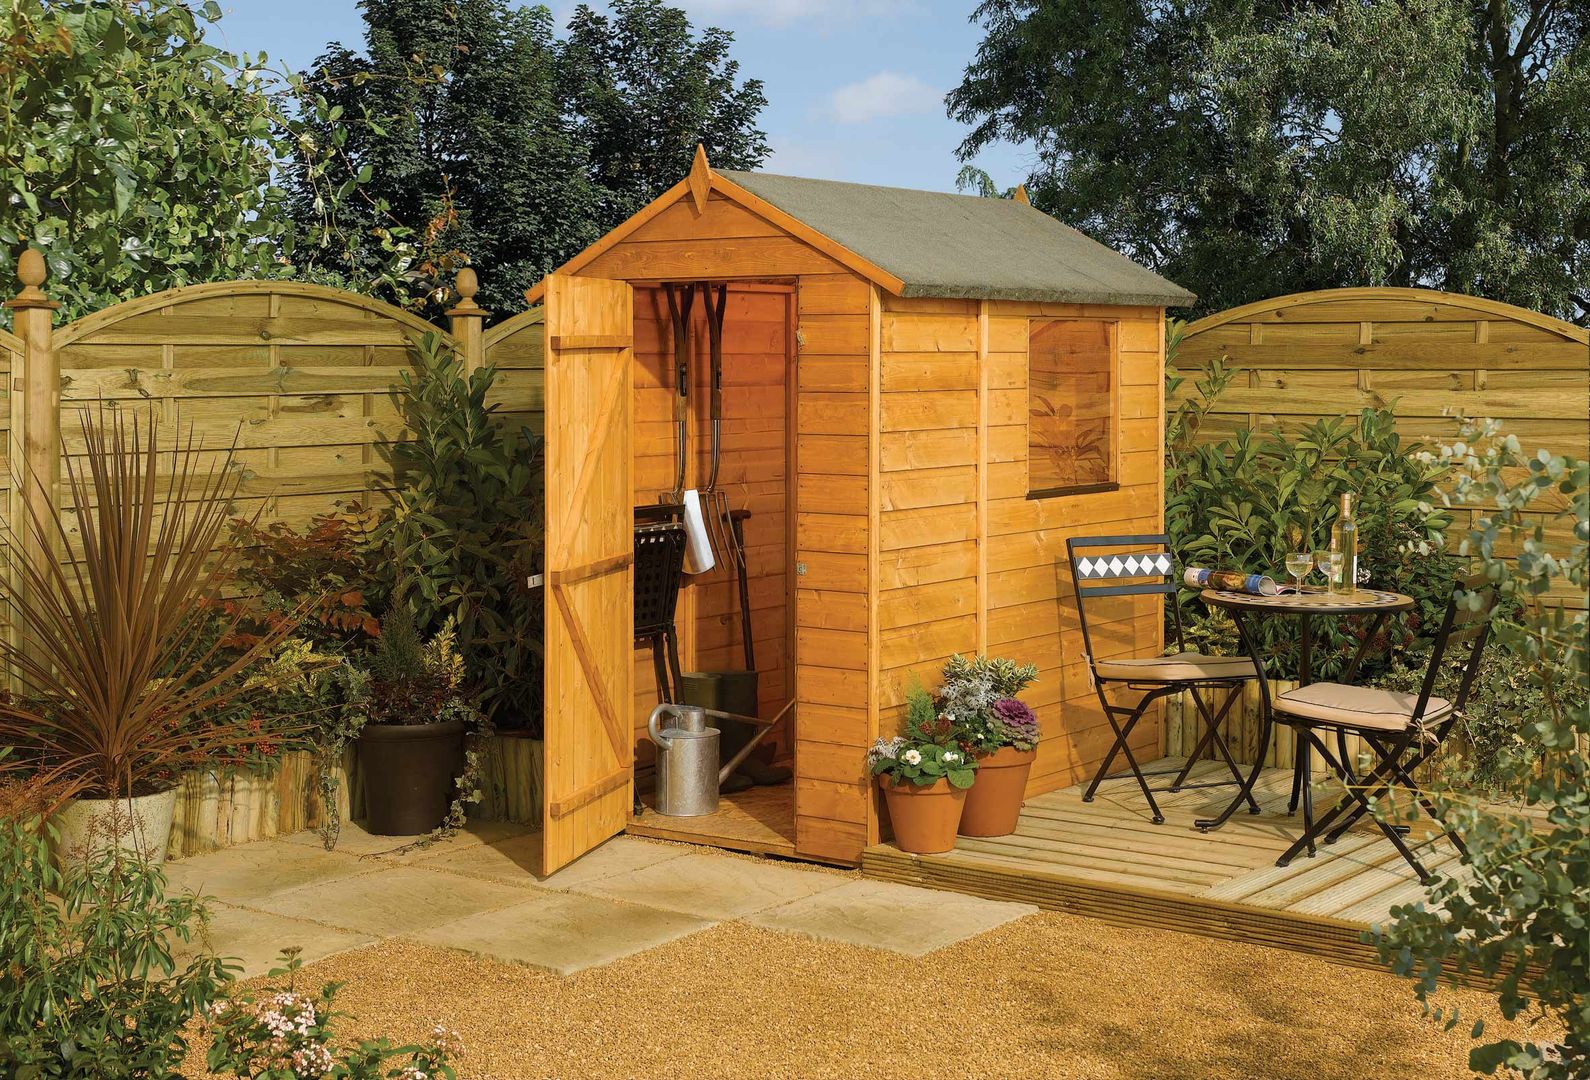 Landscaping and Garden Storage, Heritage Gardens UK Online Garden Centre Heritage Gardens UK Online Garden Centre Garden Furniture